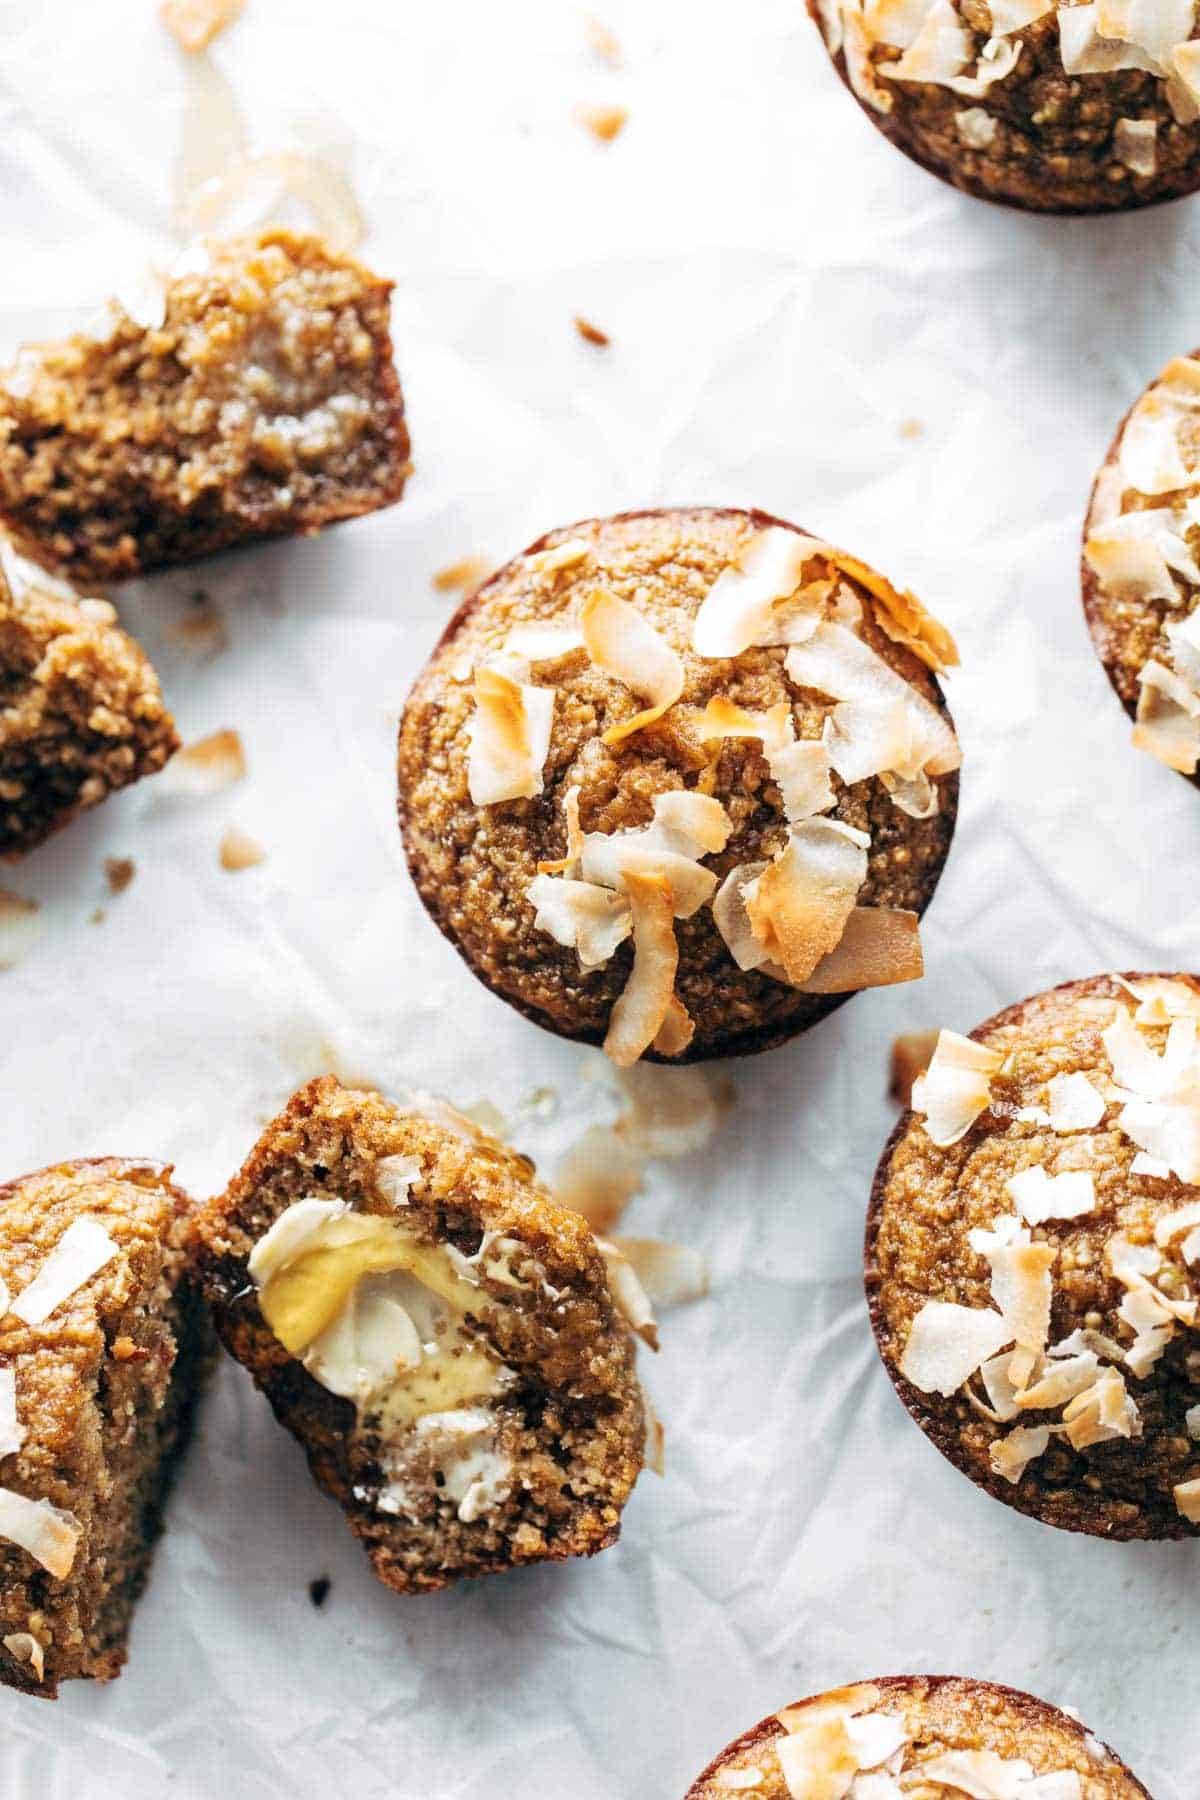 Toasted almonds on top of perfectly cooked muffins.